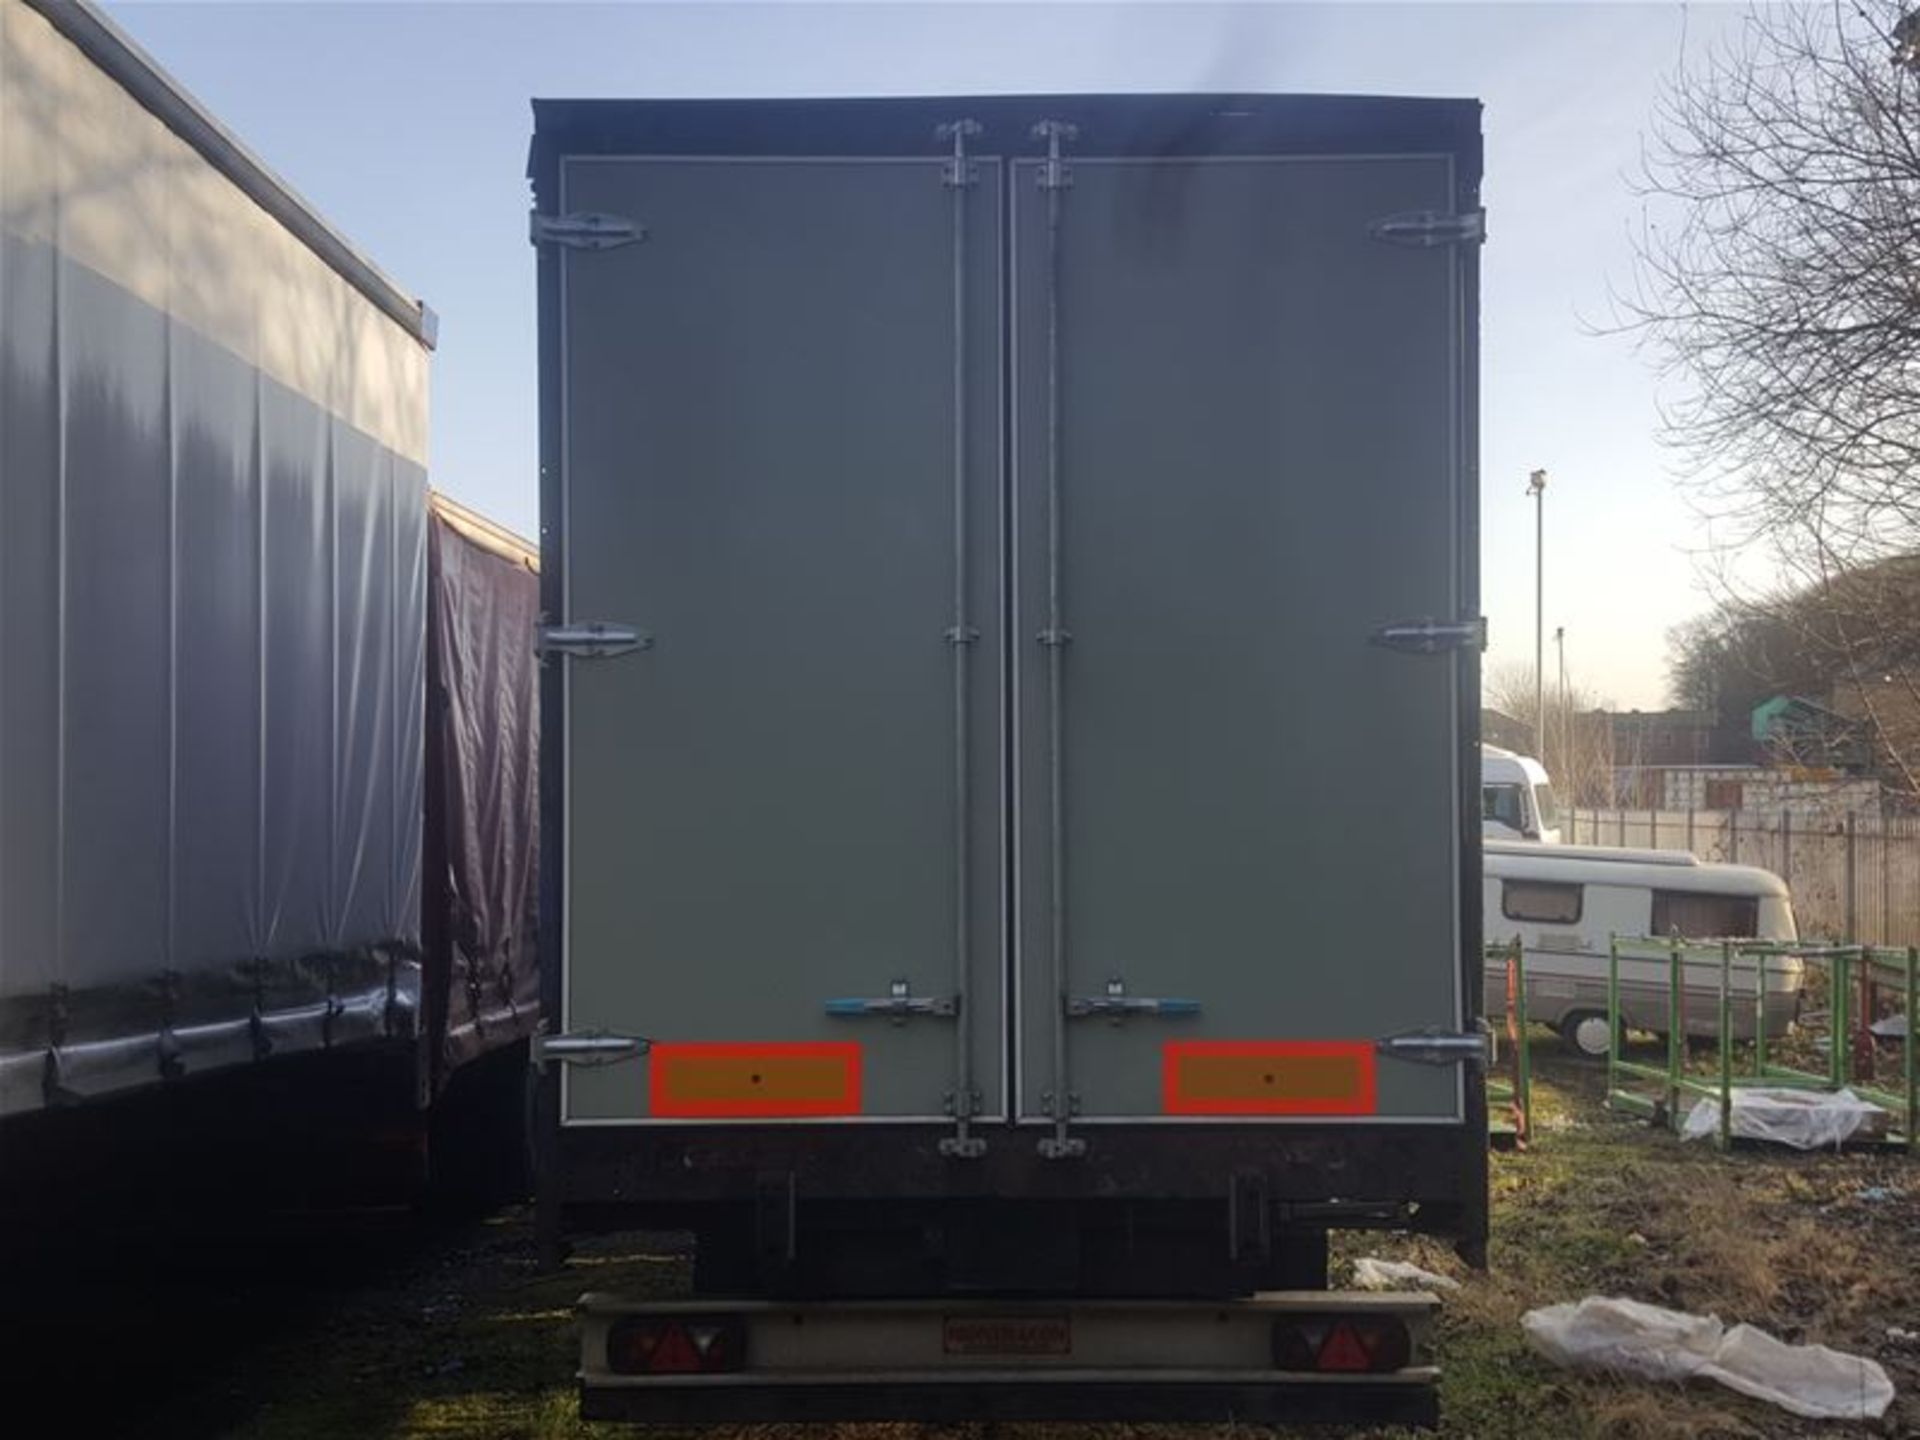 2004 Montracon 4.2 Curtainside Trailer with Taillift - Image 3 of 8